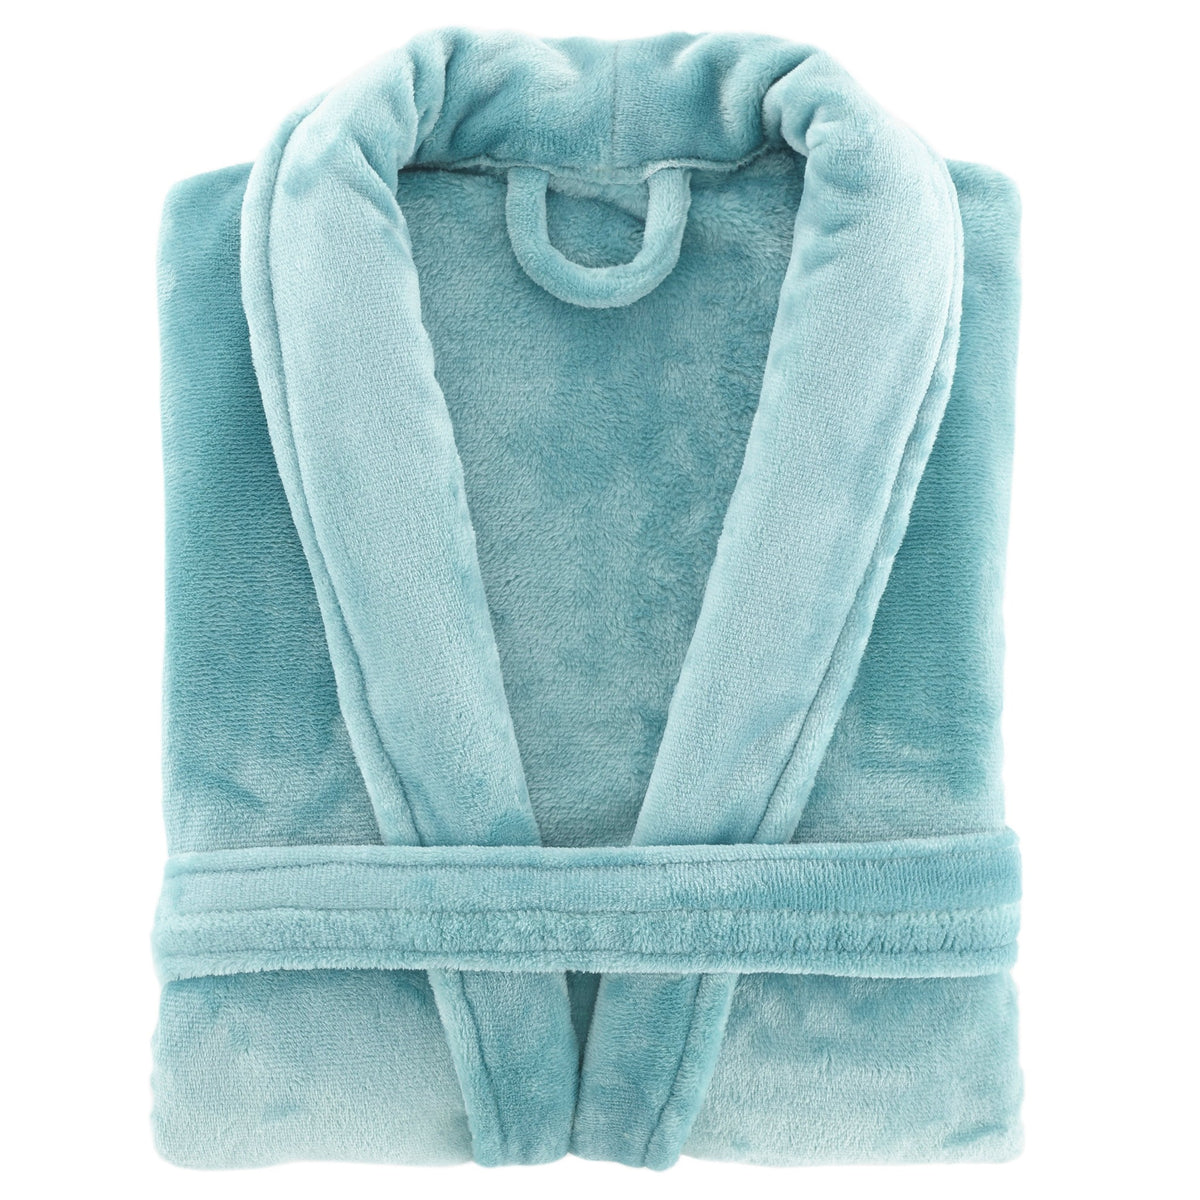 Folded Image of Pine Cone Hill Sheepy Fleece 2.0 Robe in Color Teal